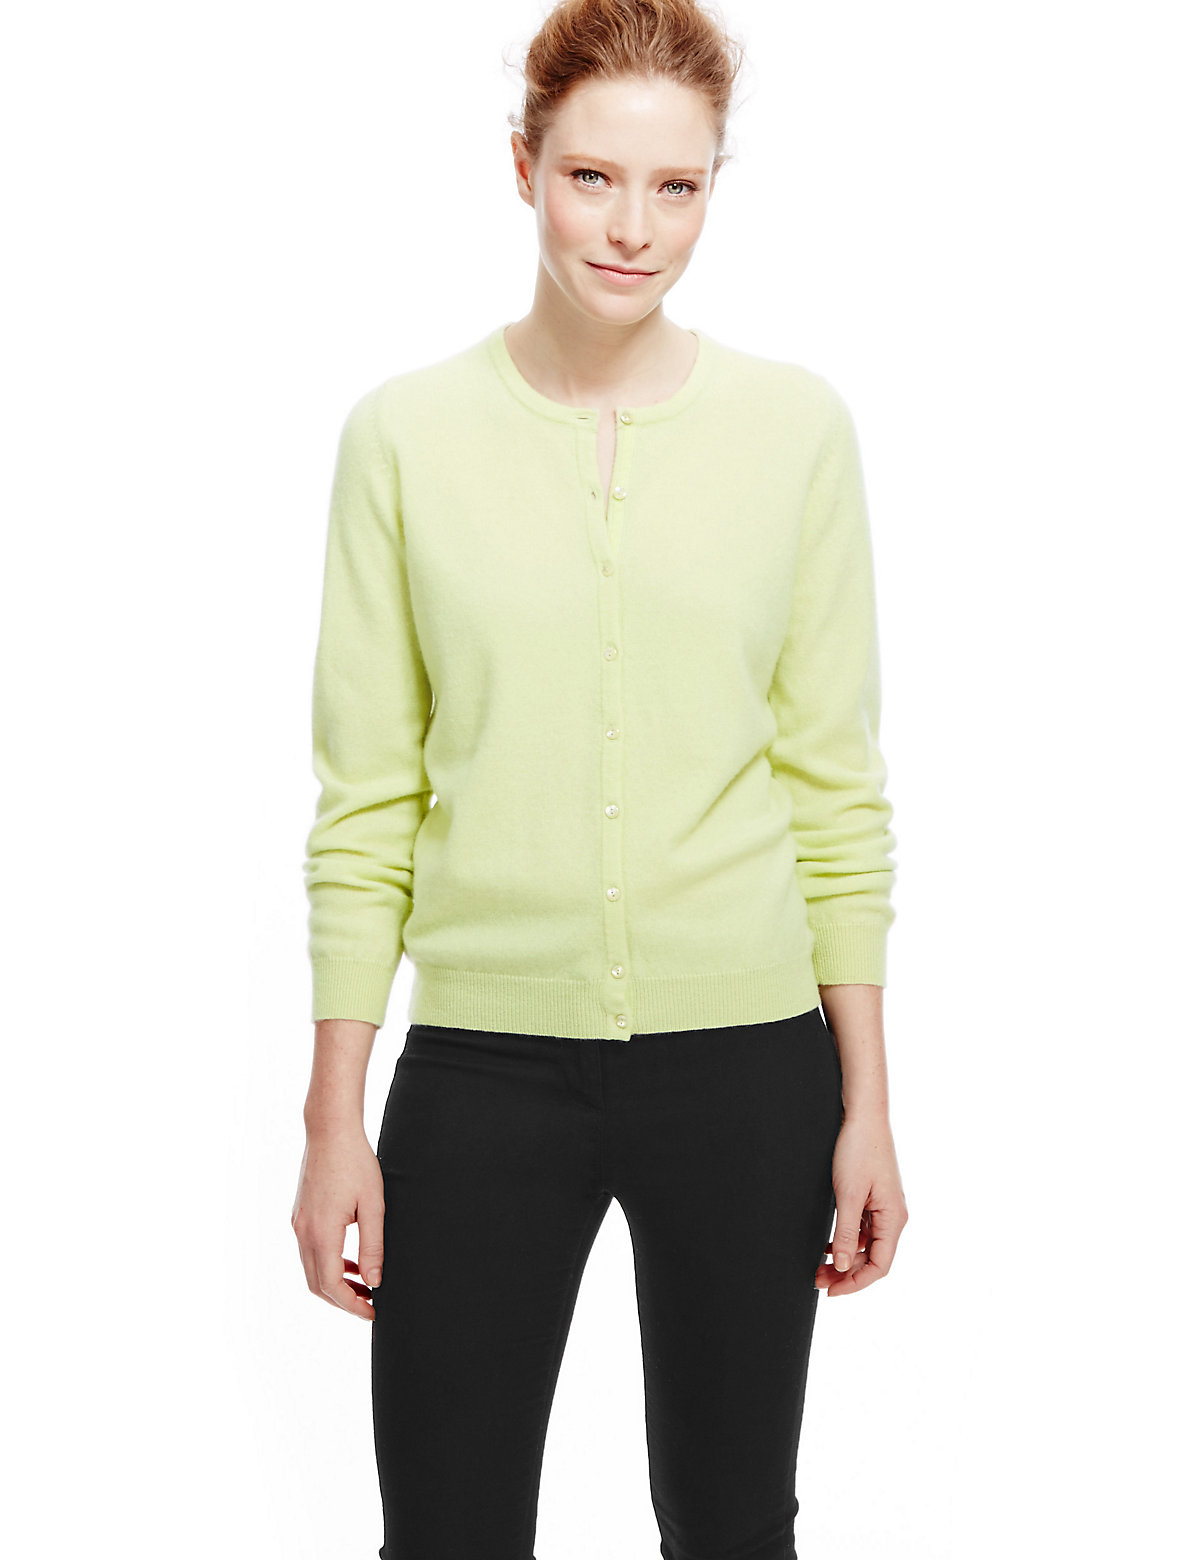 Marks & Spencer Cashmere Cardigan Womens Cardigan - Compare Prices at ...